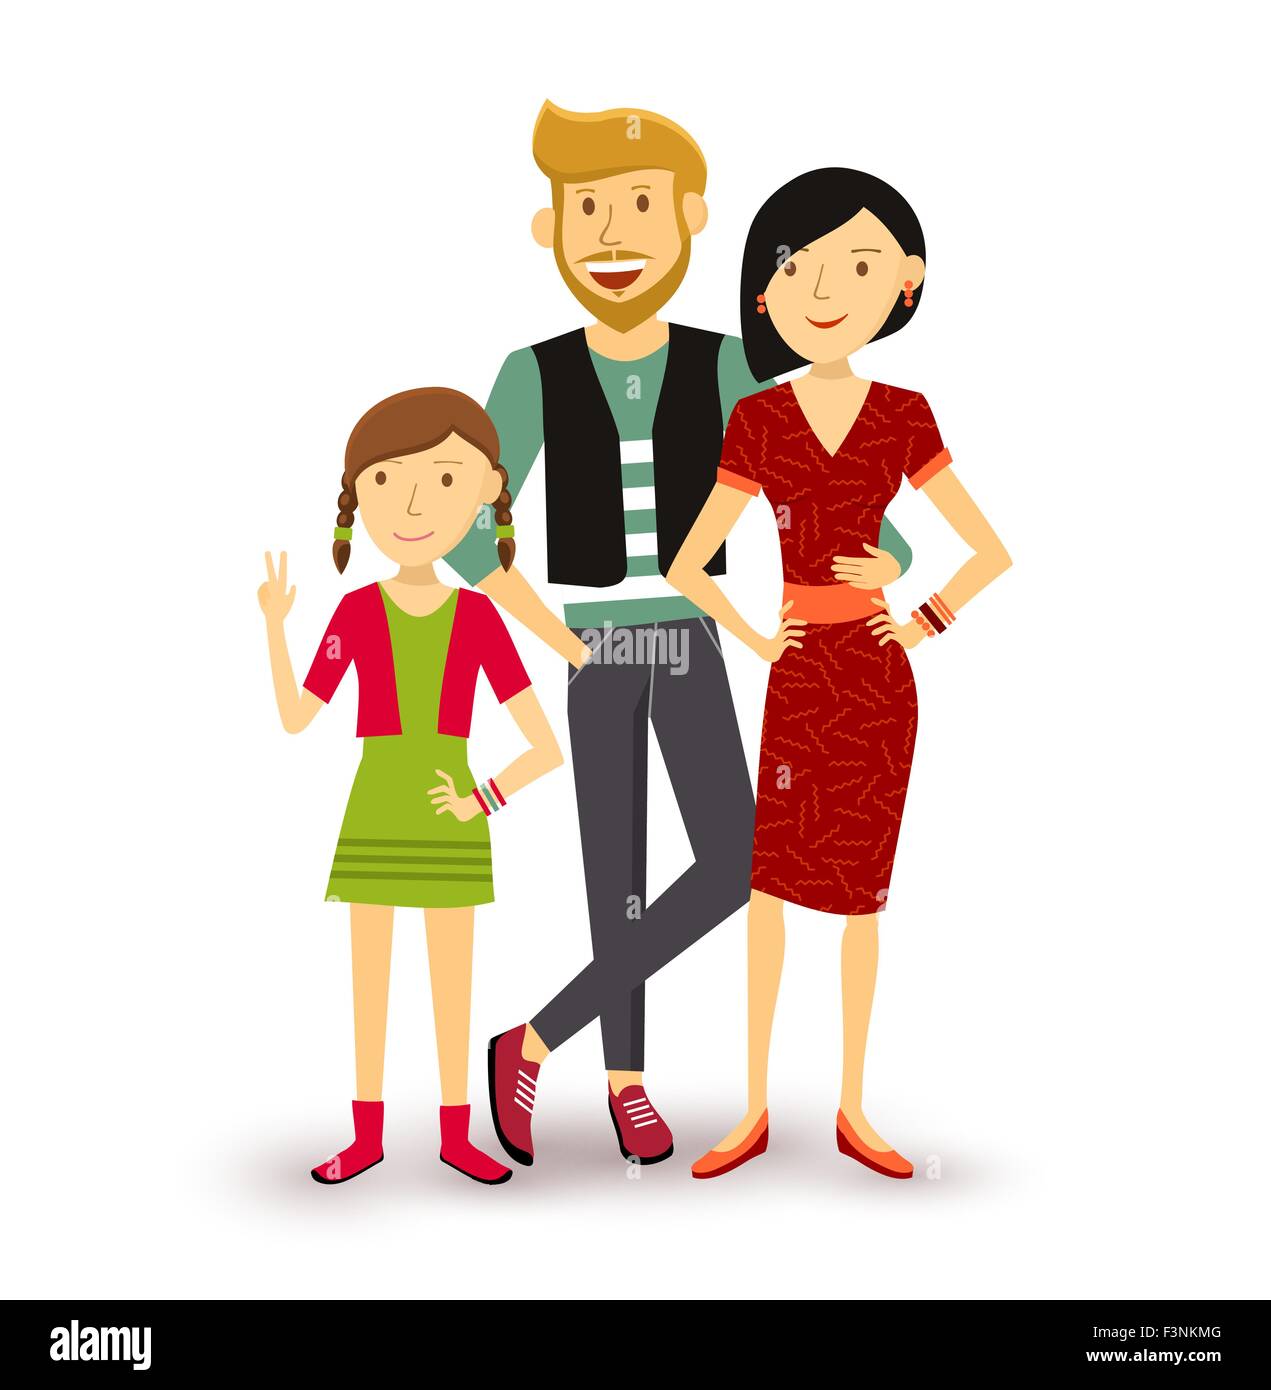 People collection: one child happy family group generation with dad, mom and young daughter in flat style illustration. Stock Vector